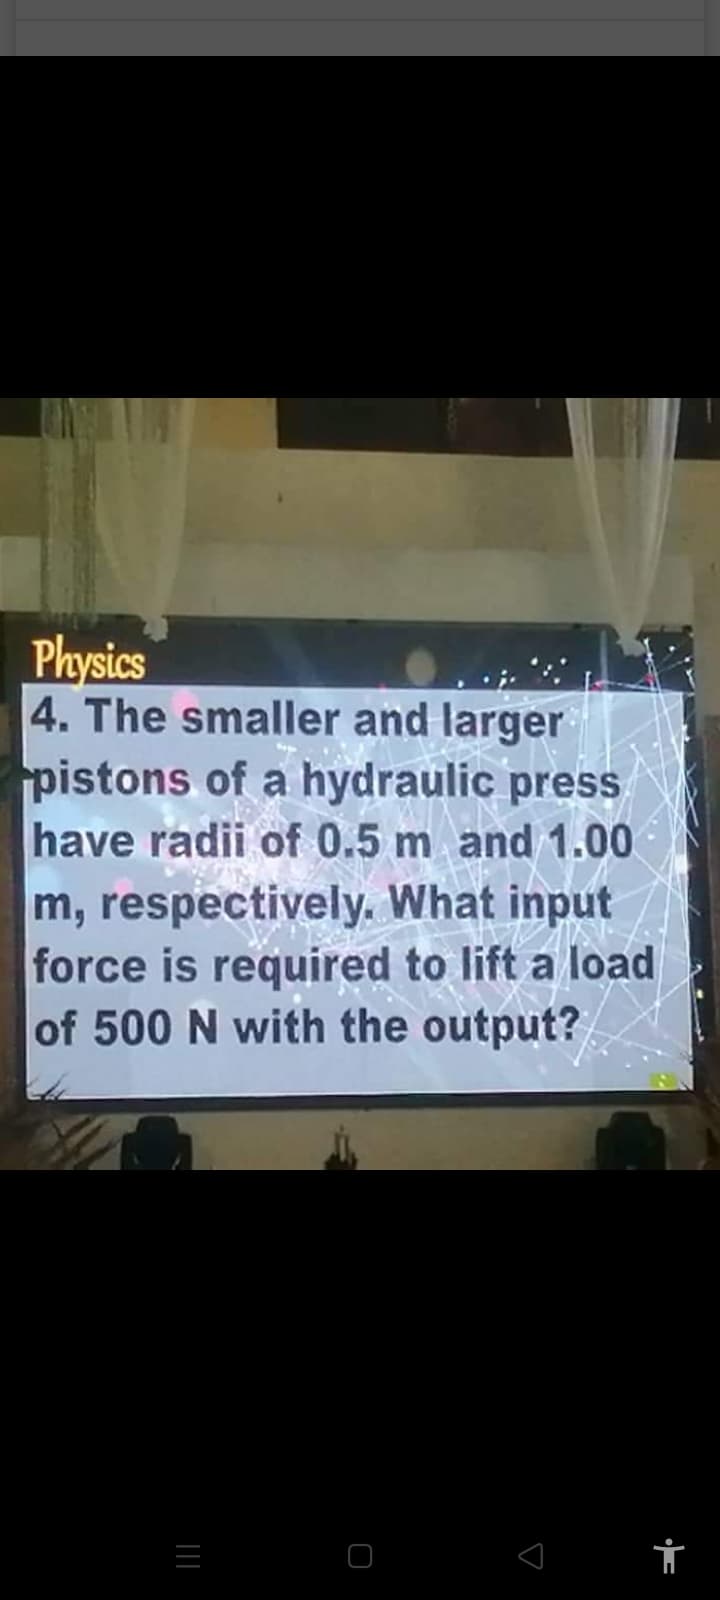 Physics
4. The smaller and larger
pistons of a hydraulic press
have radii of 0.5 m and 1.00
m, respectively. What input
force is required to lift a load
of 500 N with the output?
||
